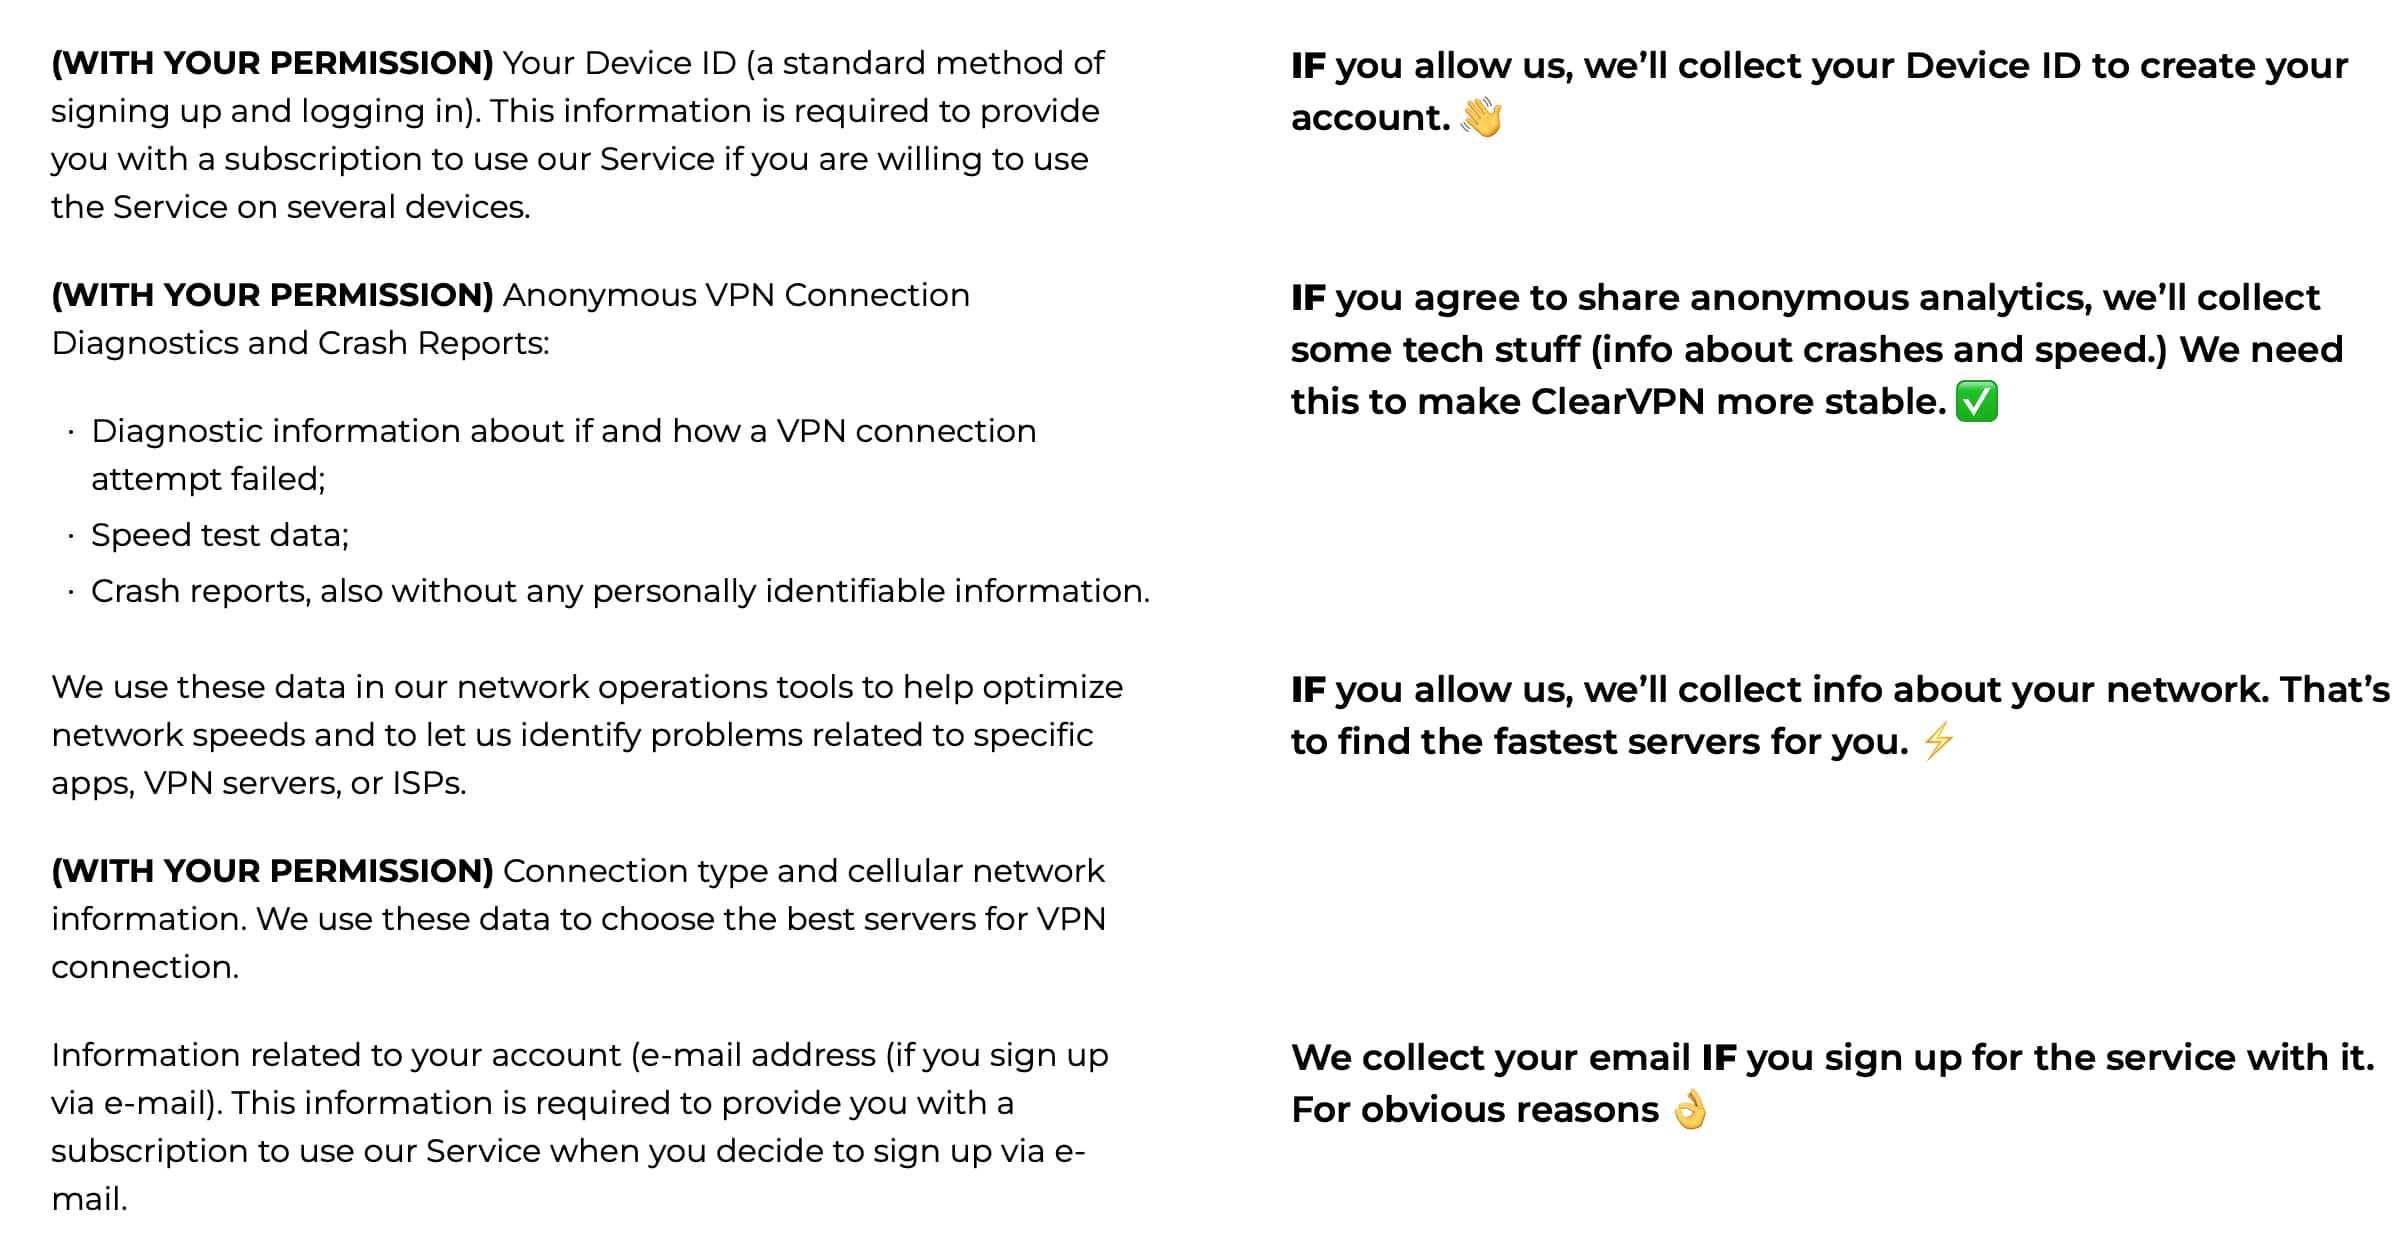 ClearVPN - Privacy Policy - Collection 1